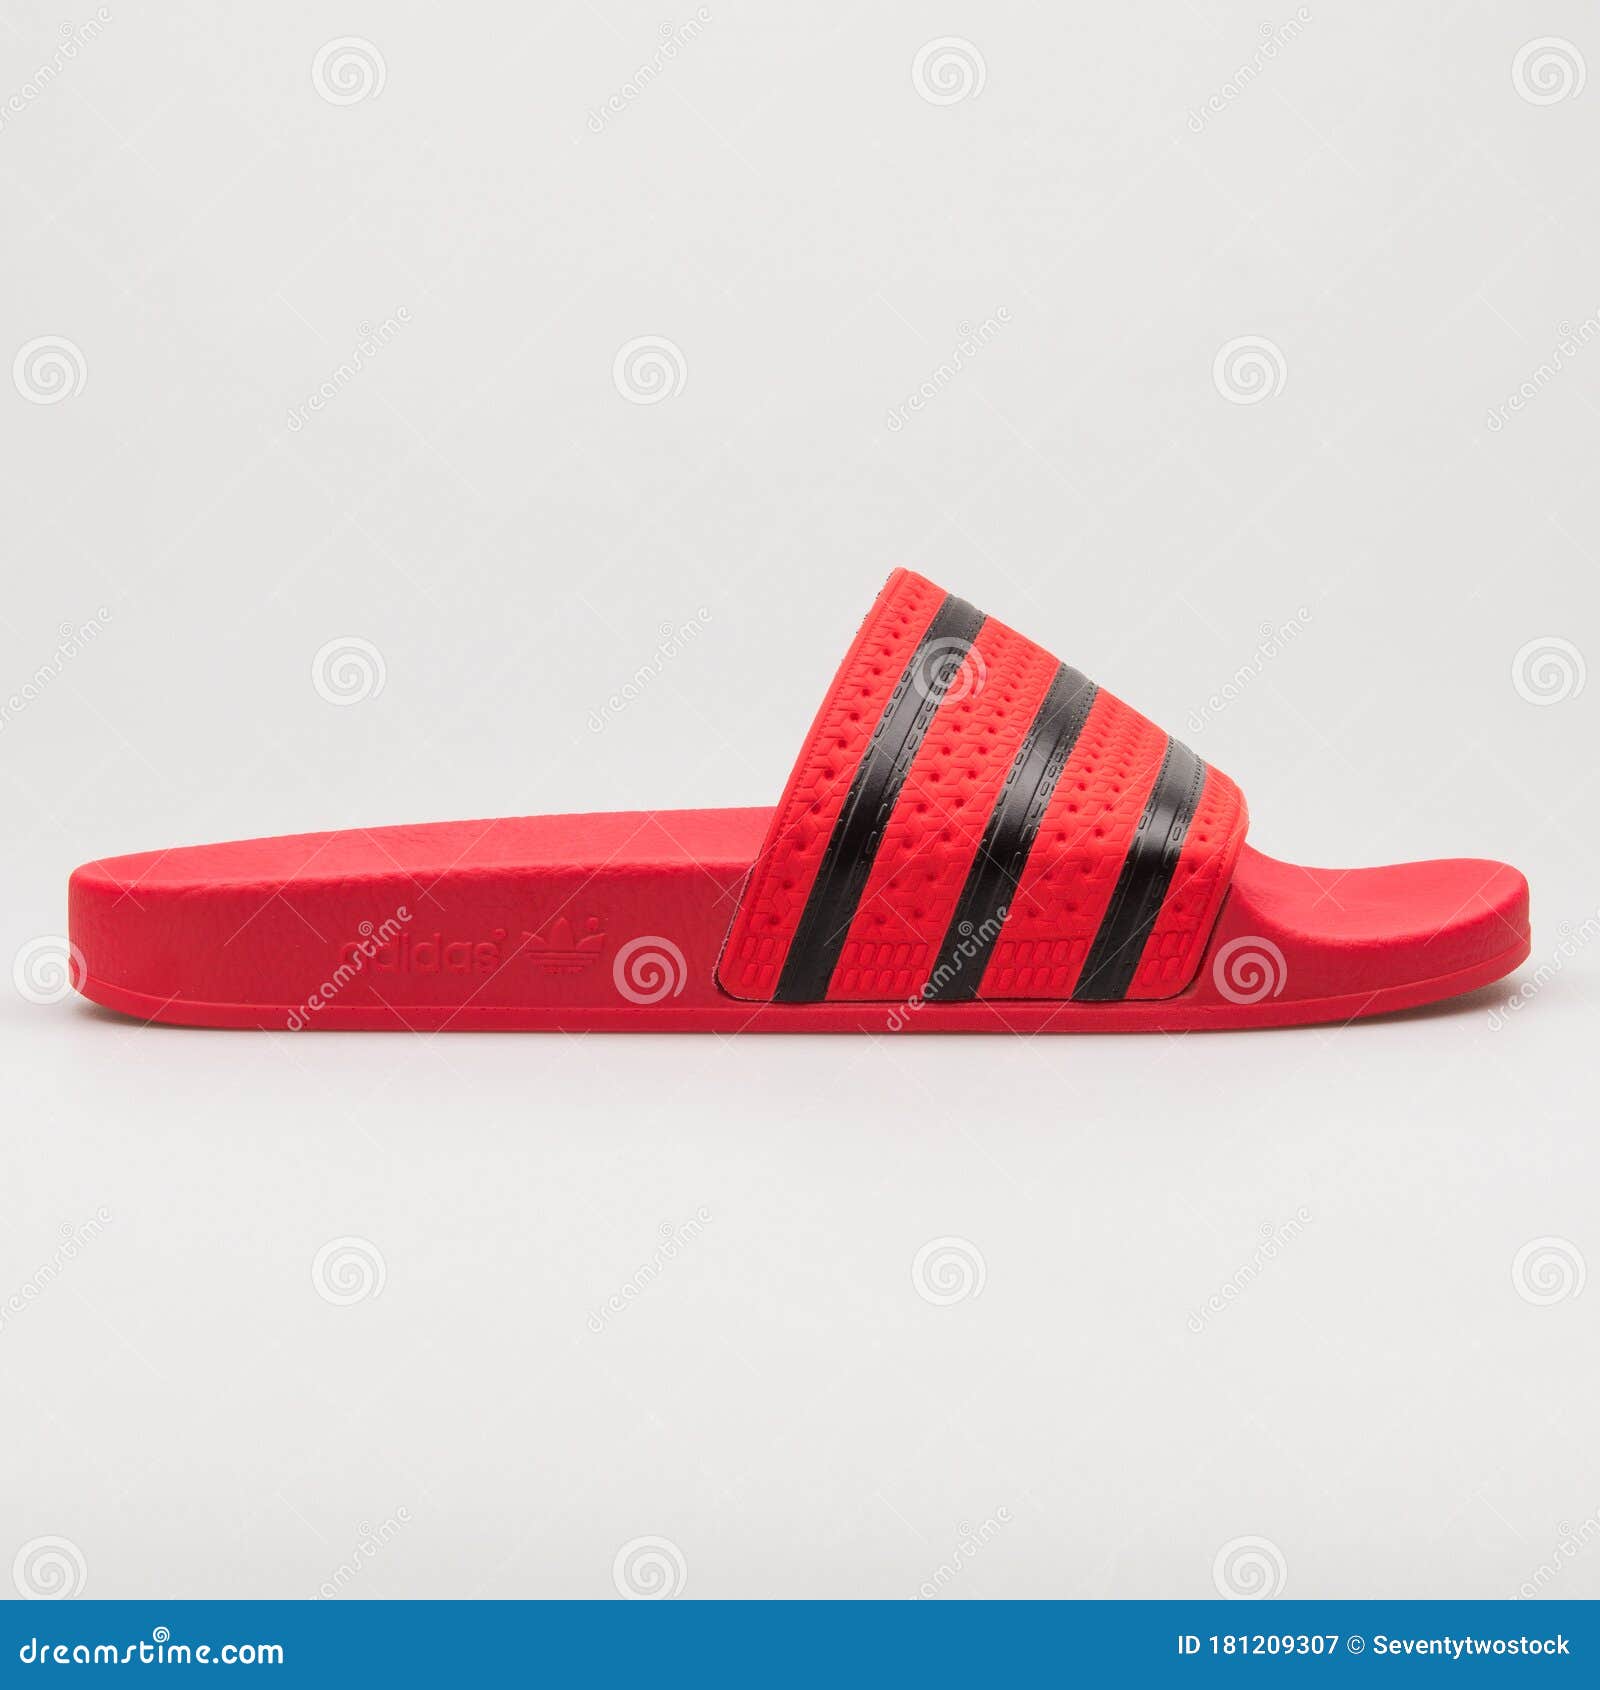 Adidas Adilette Red and Black Sandal - of casual: 181209307